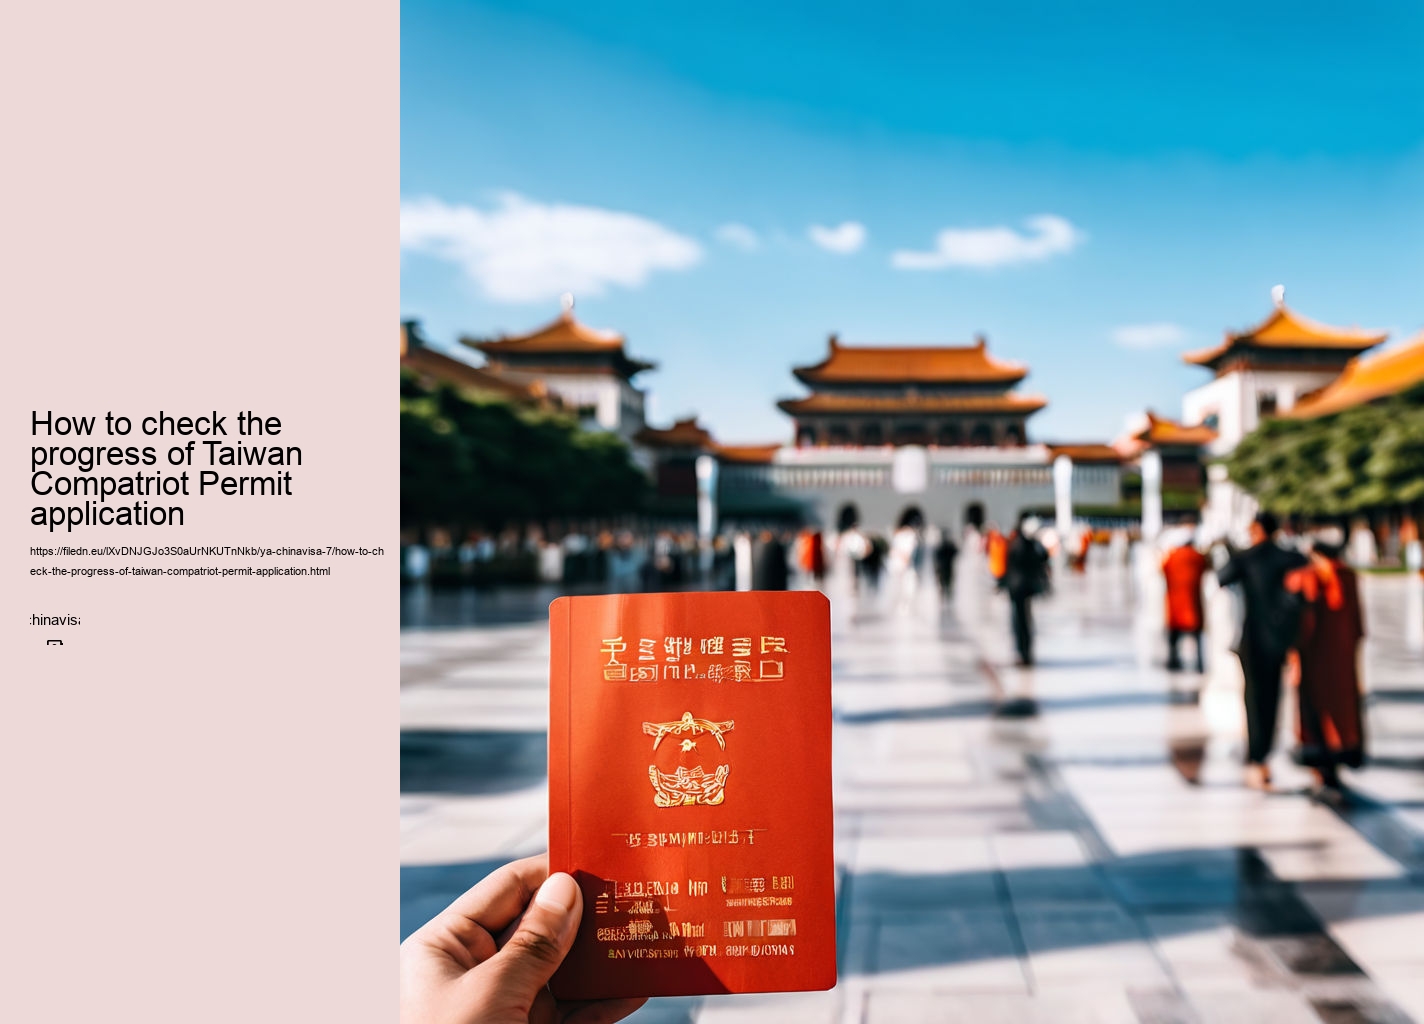 How to check the progress of Taiwan Compatriot Permit application